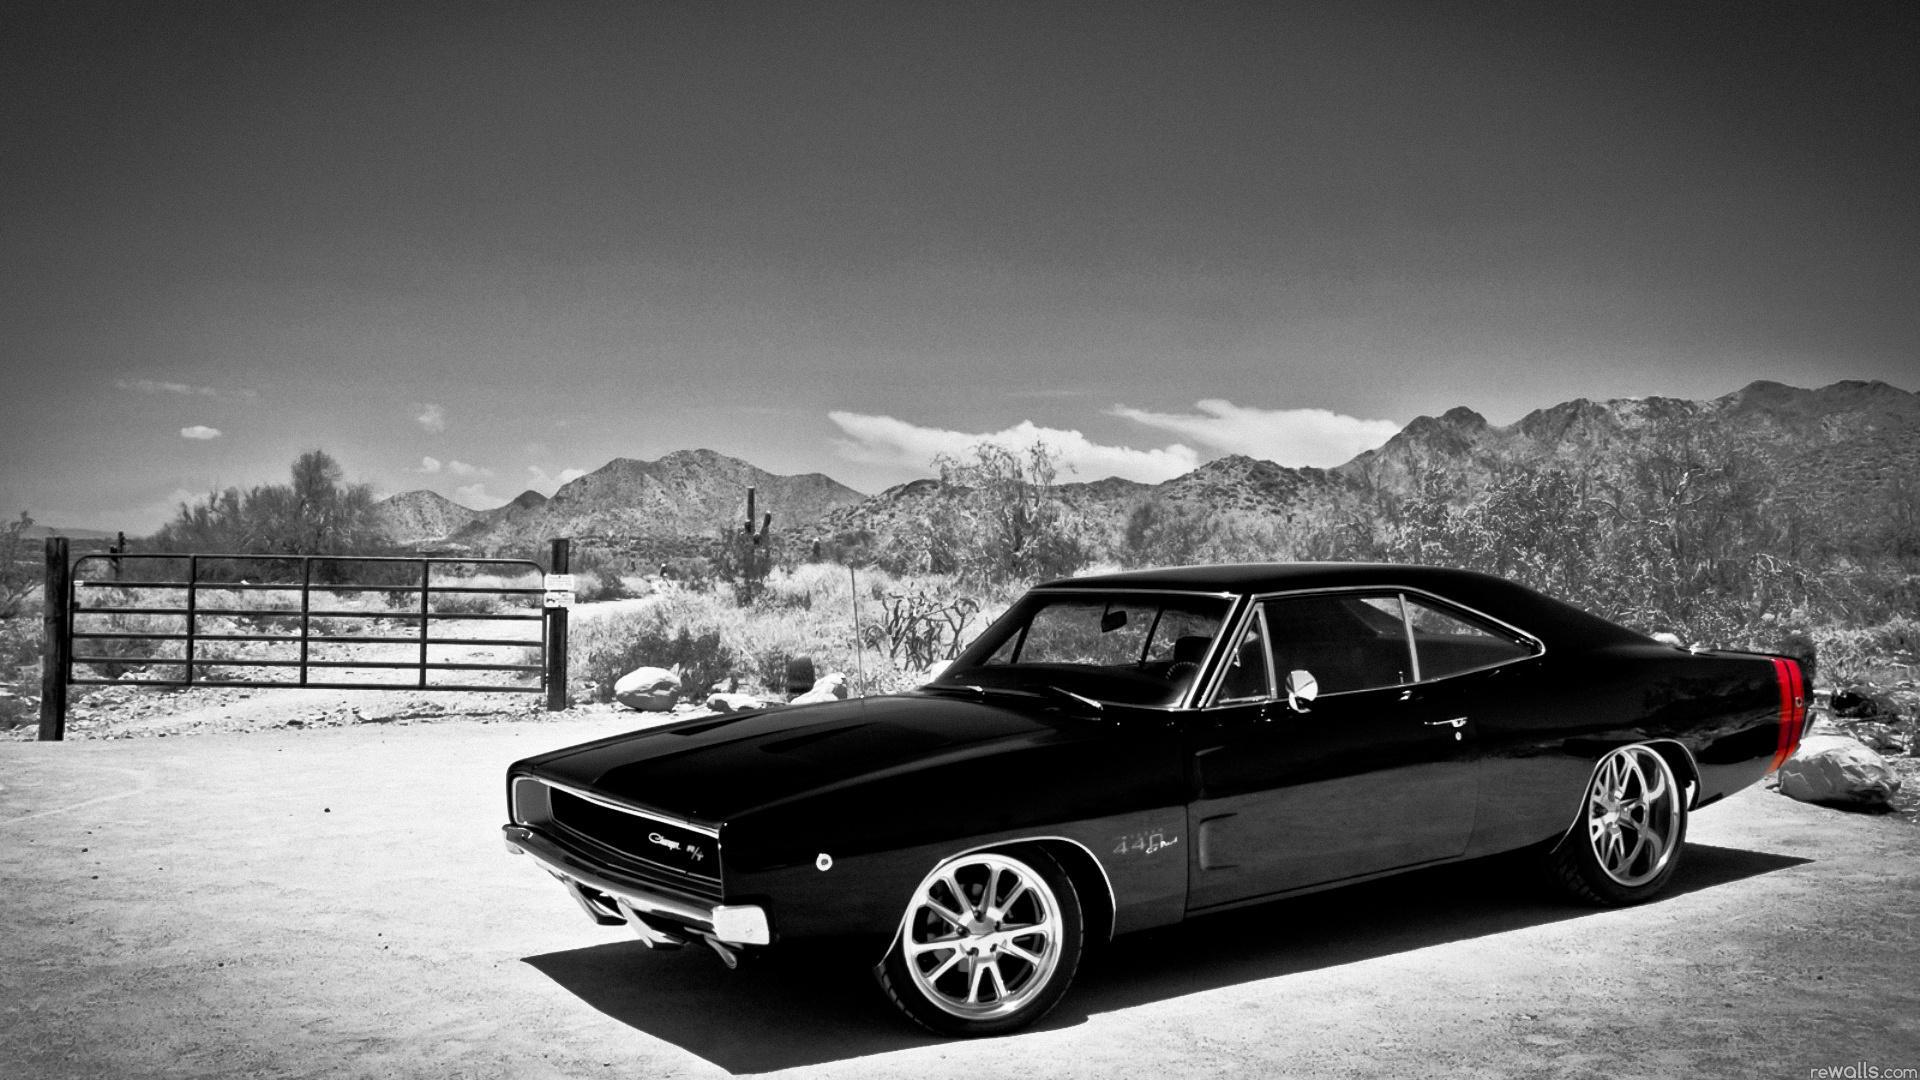 American Muscle Cars Wallpaper Free American Muscle Cars